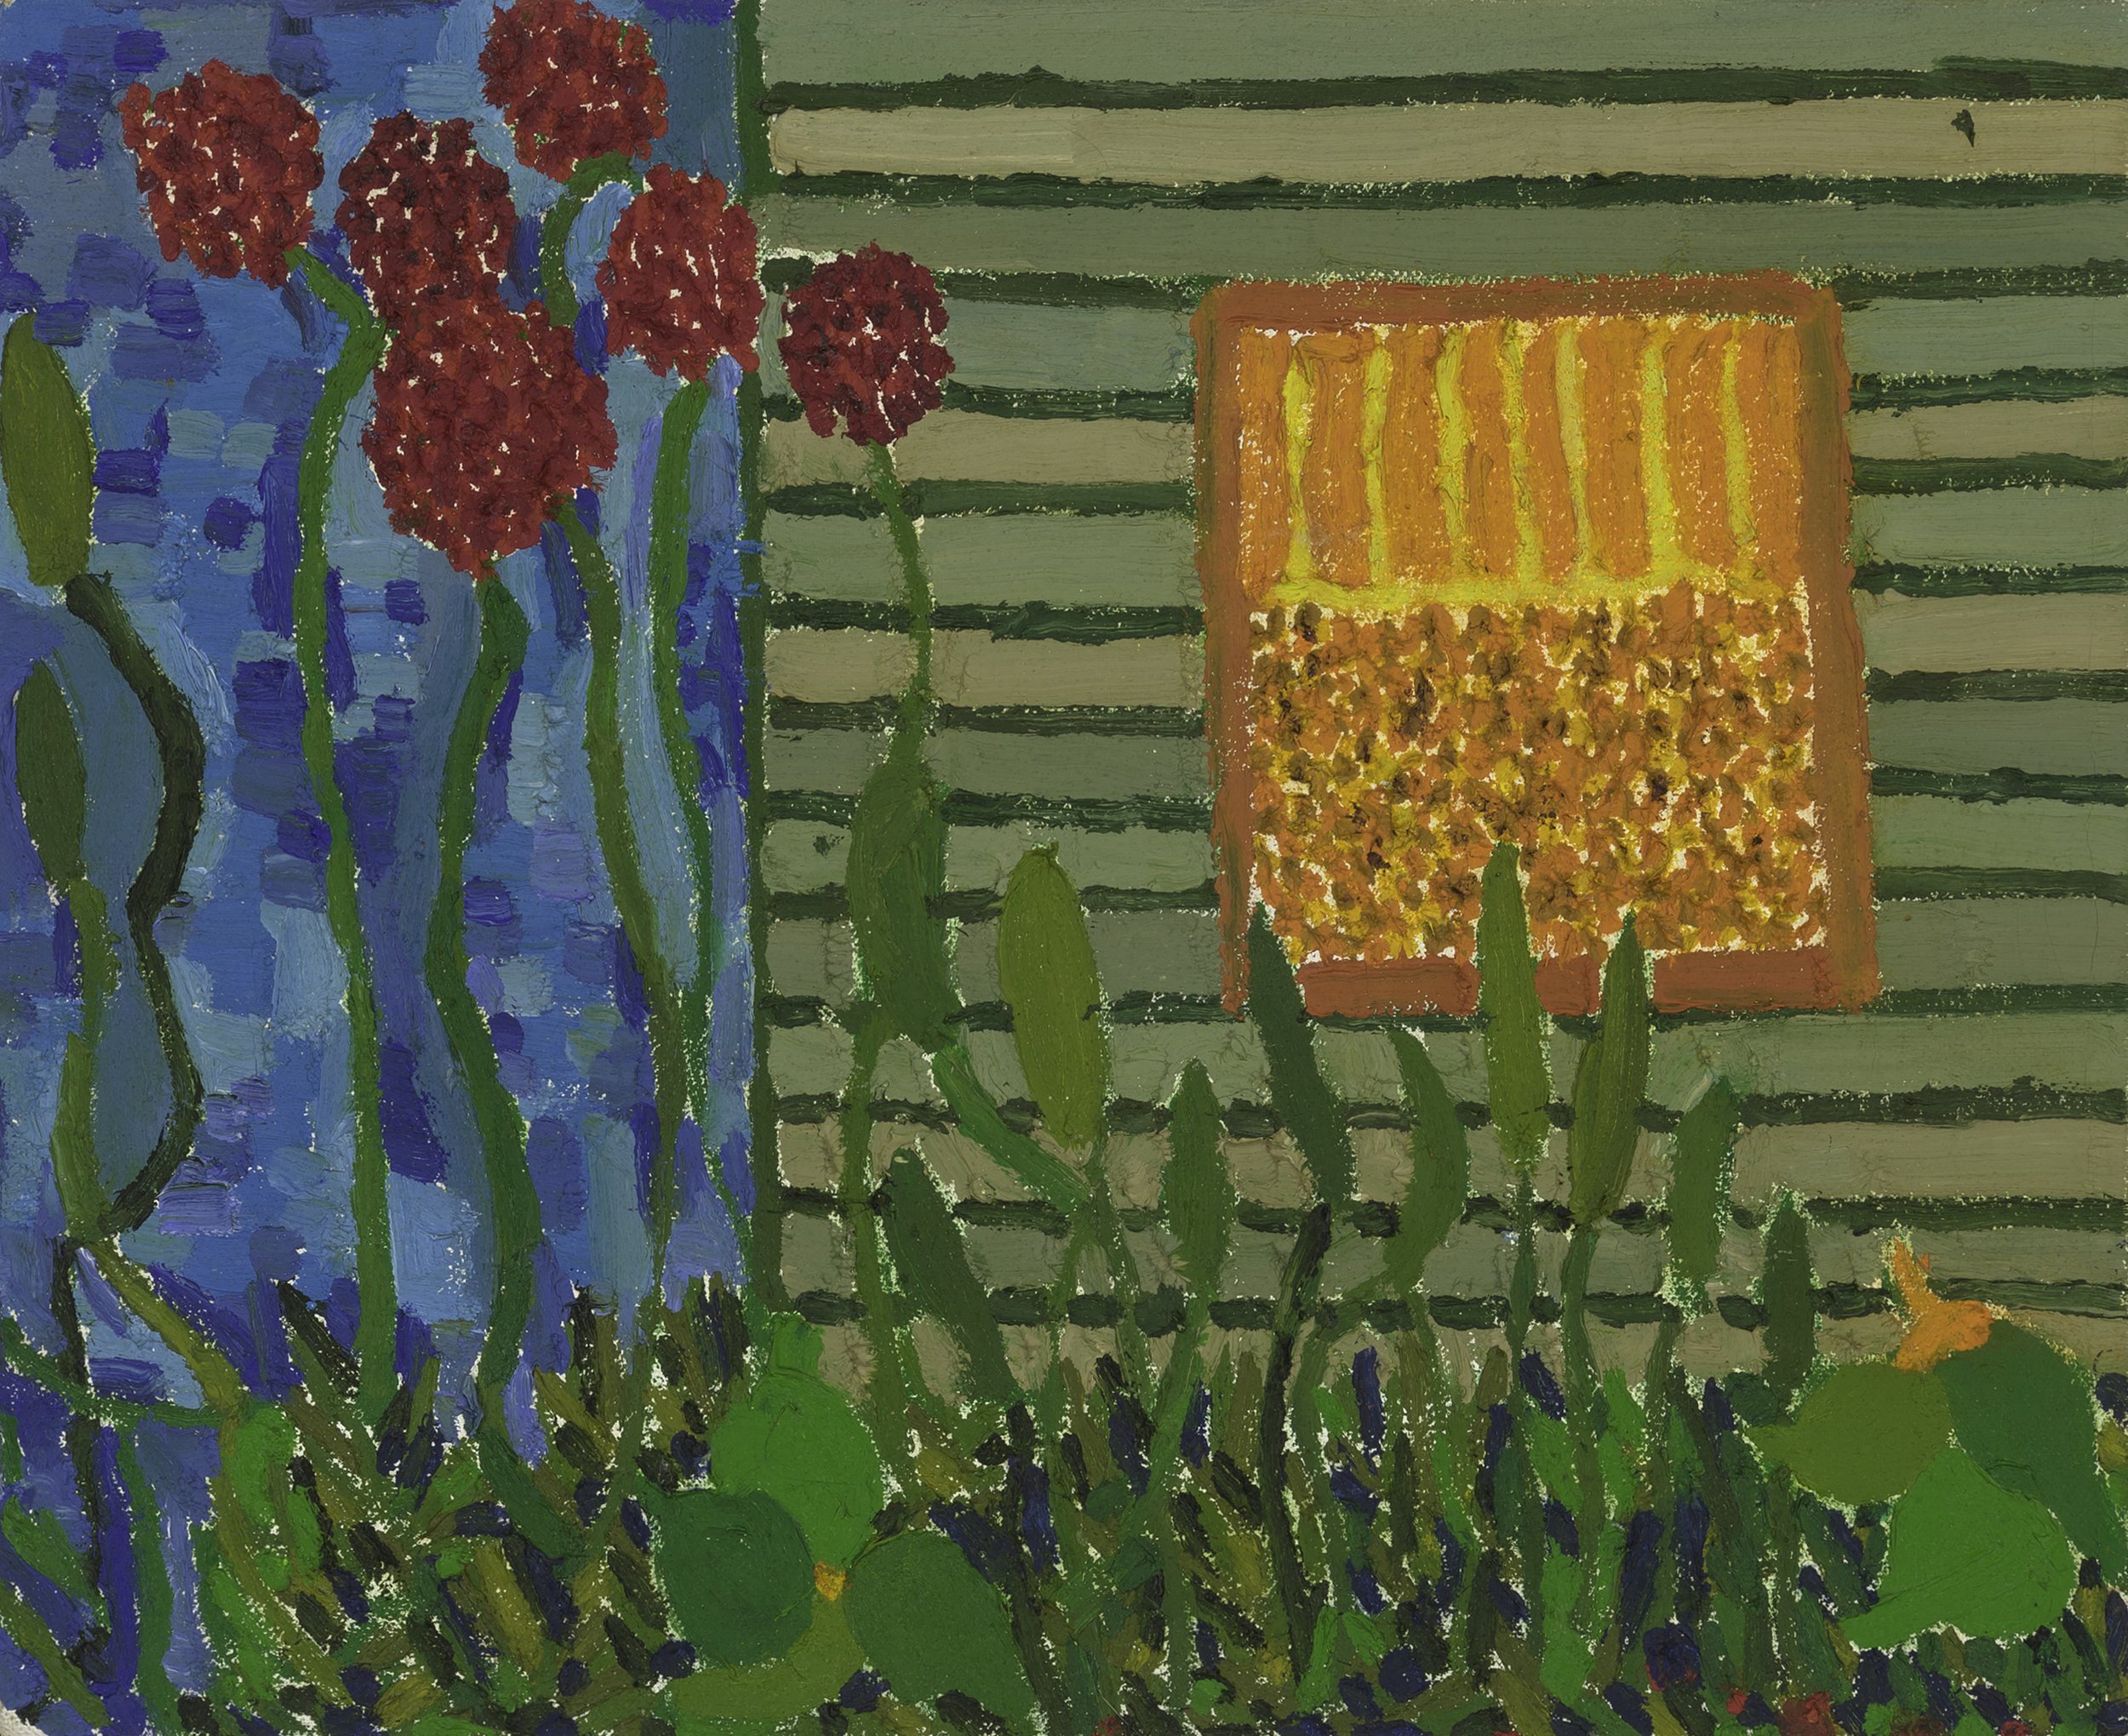 Painting of the garden with red flowers at the side of a green house against a blue sky.